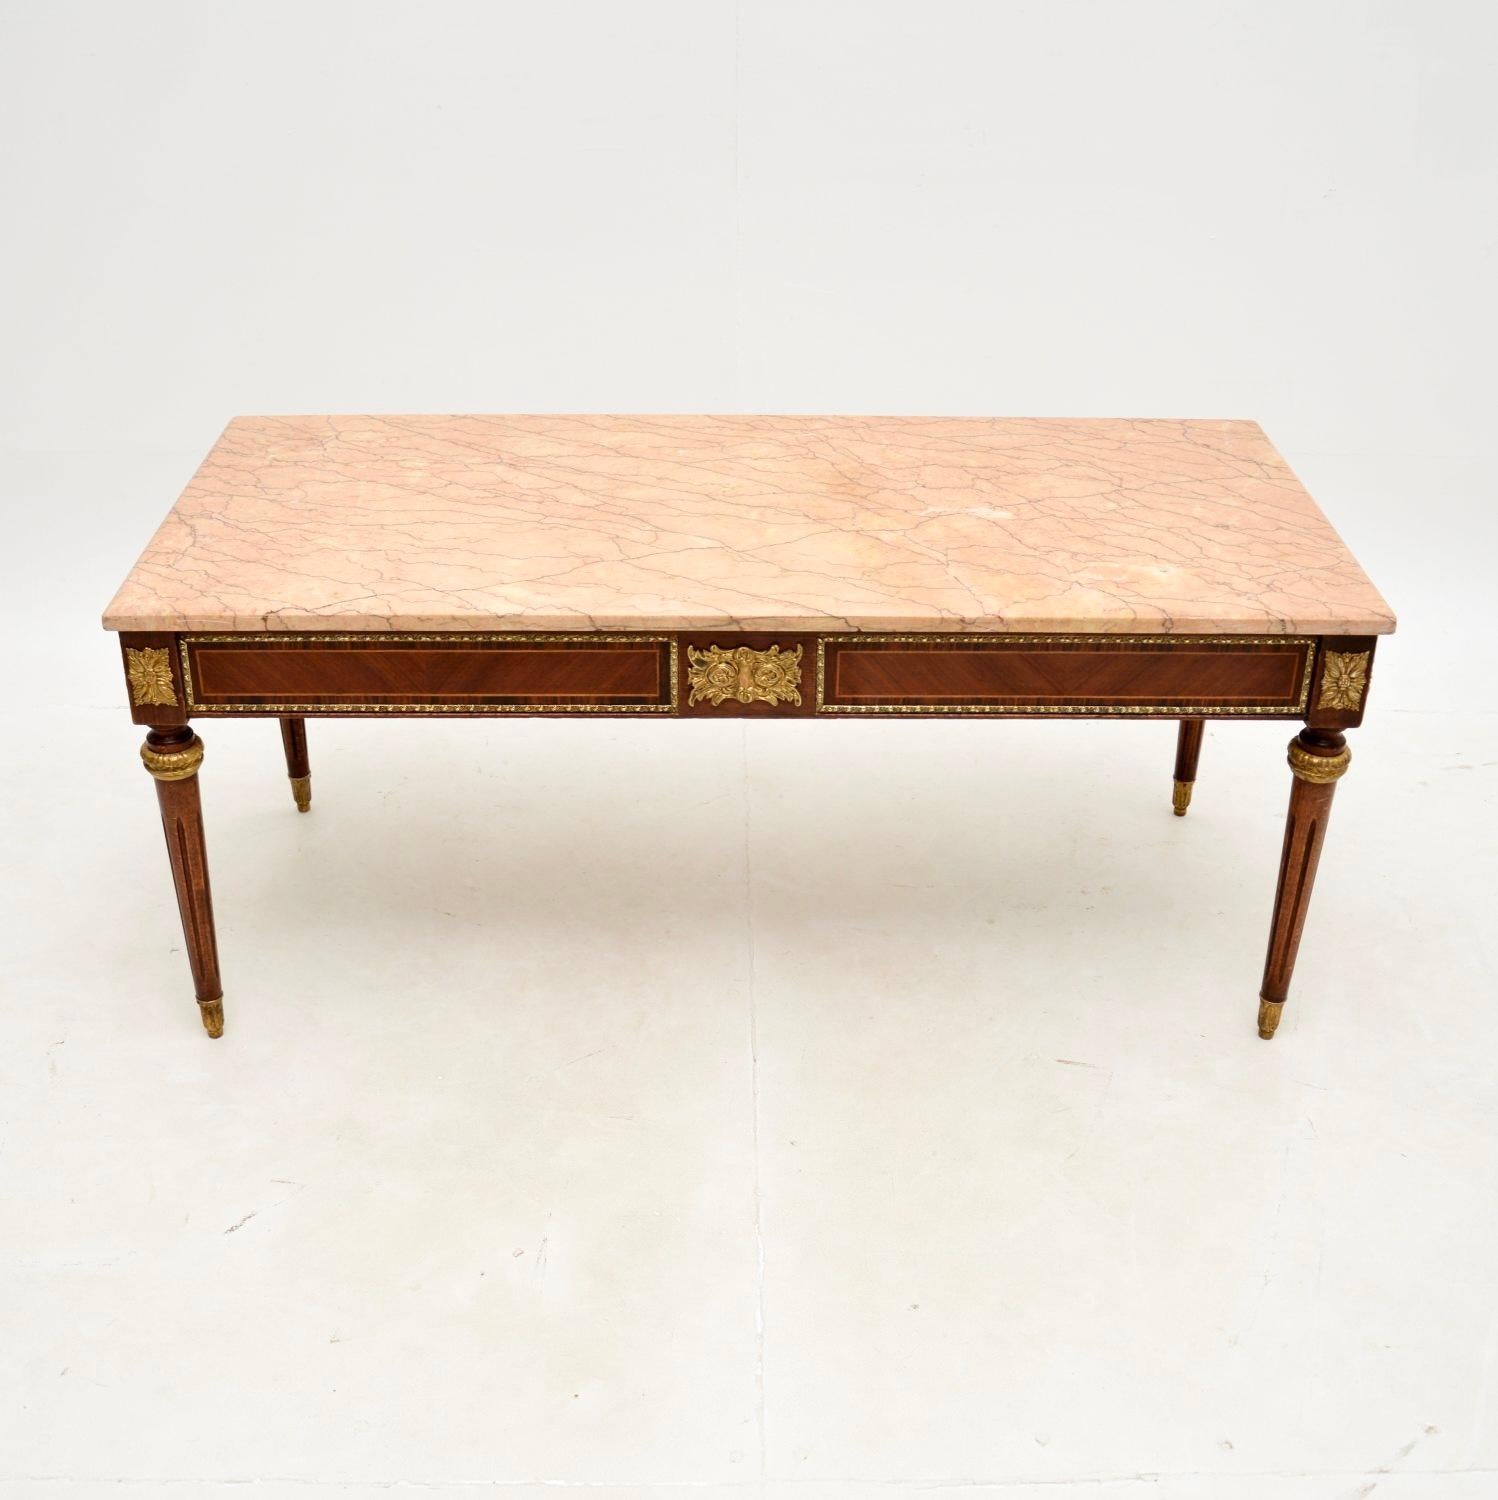 A beautiful and extremely well made antique French marble top coffee table, dating from around the 1930’s.

This is of superb quality, the frame is made from various woods, predominantly walnut. There are high quality ormolu mounts throughout, and a